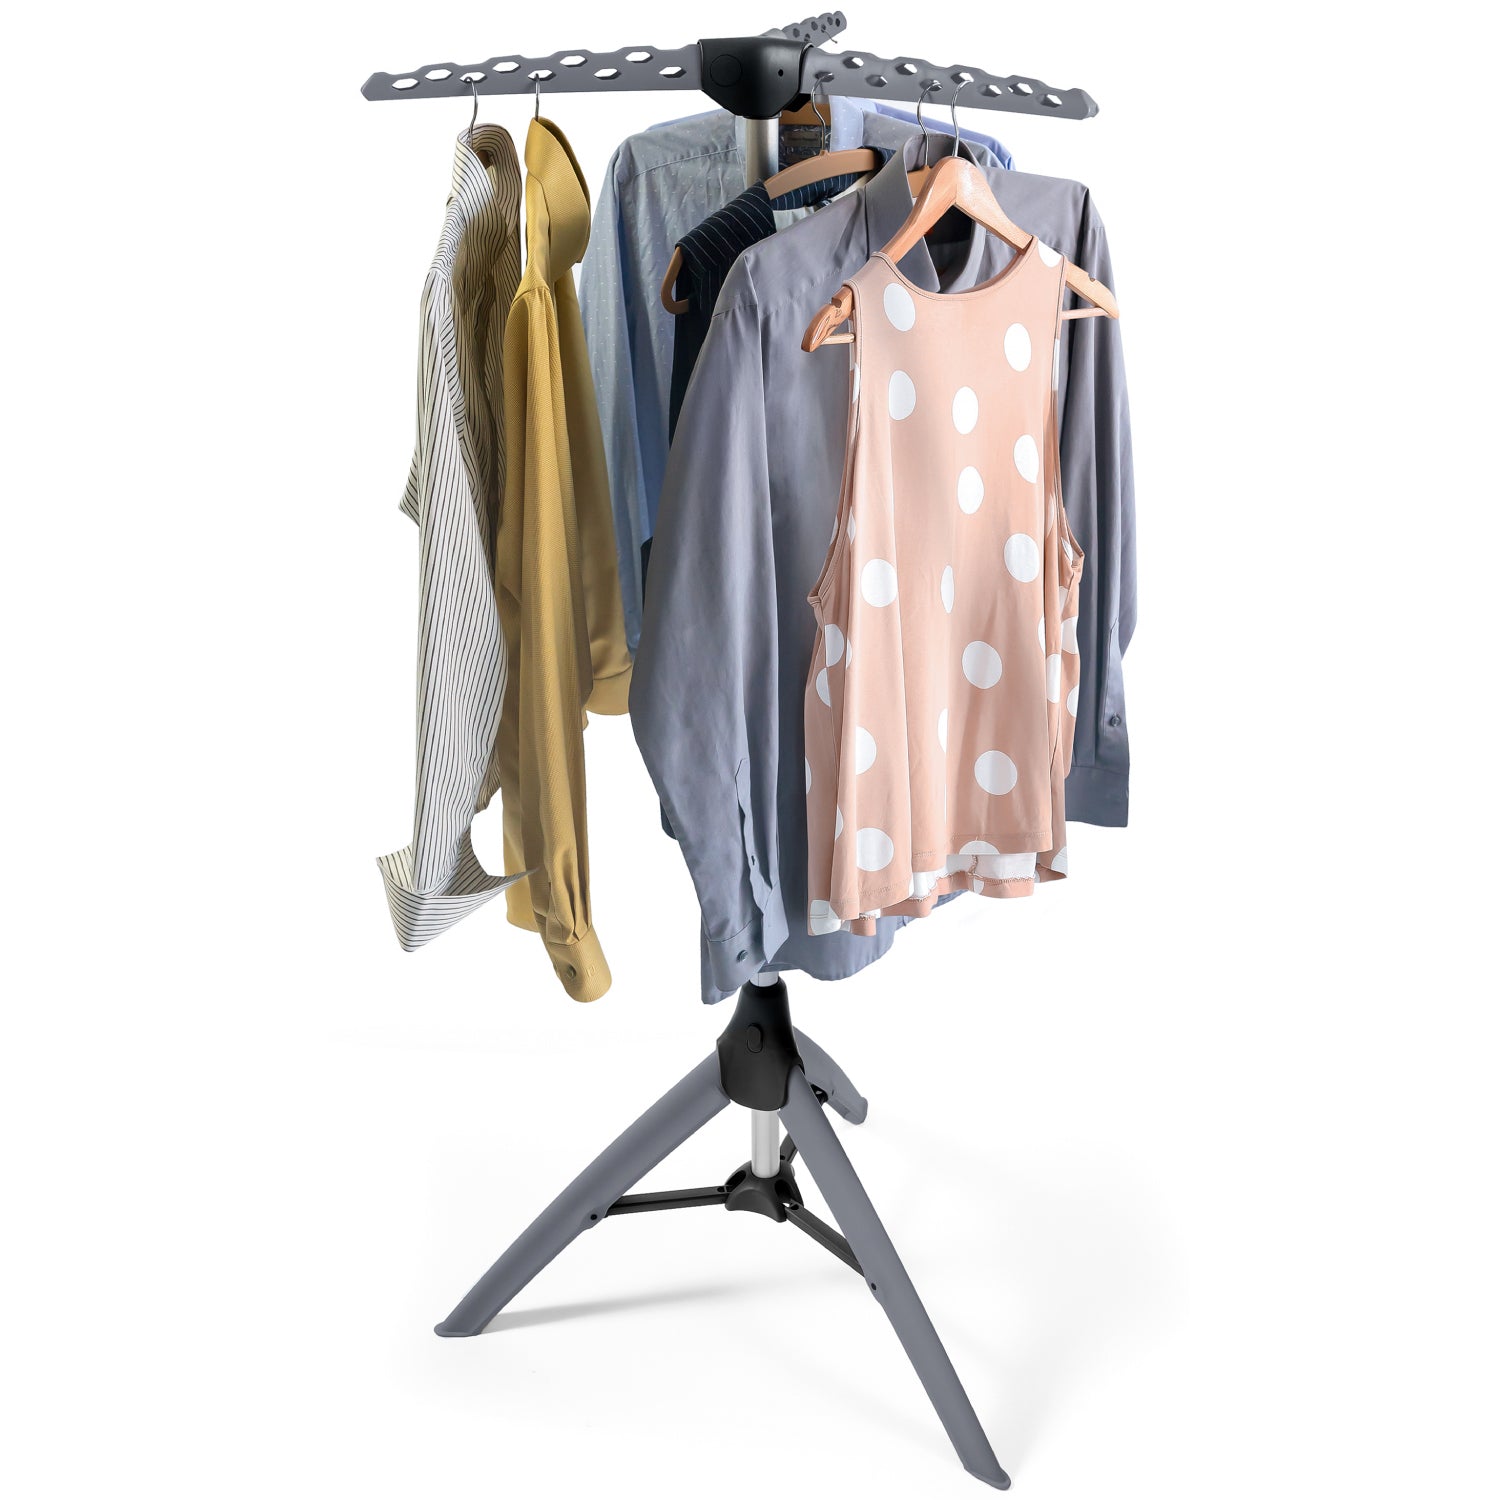 Amazon.com: Vintage Iron Pipe Garment Rack, Floor-standing Garment Hanger  with Storage, Clothes/Shoe/Bag Organizers Display Stand, Garment Shelf for  Retail Stores : Home & Kitchen